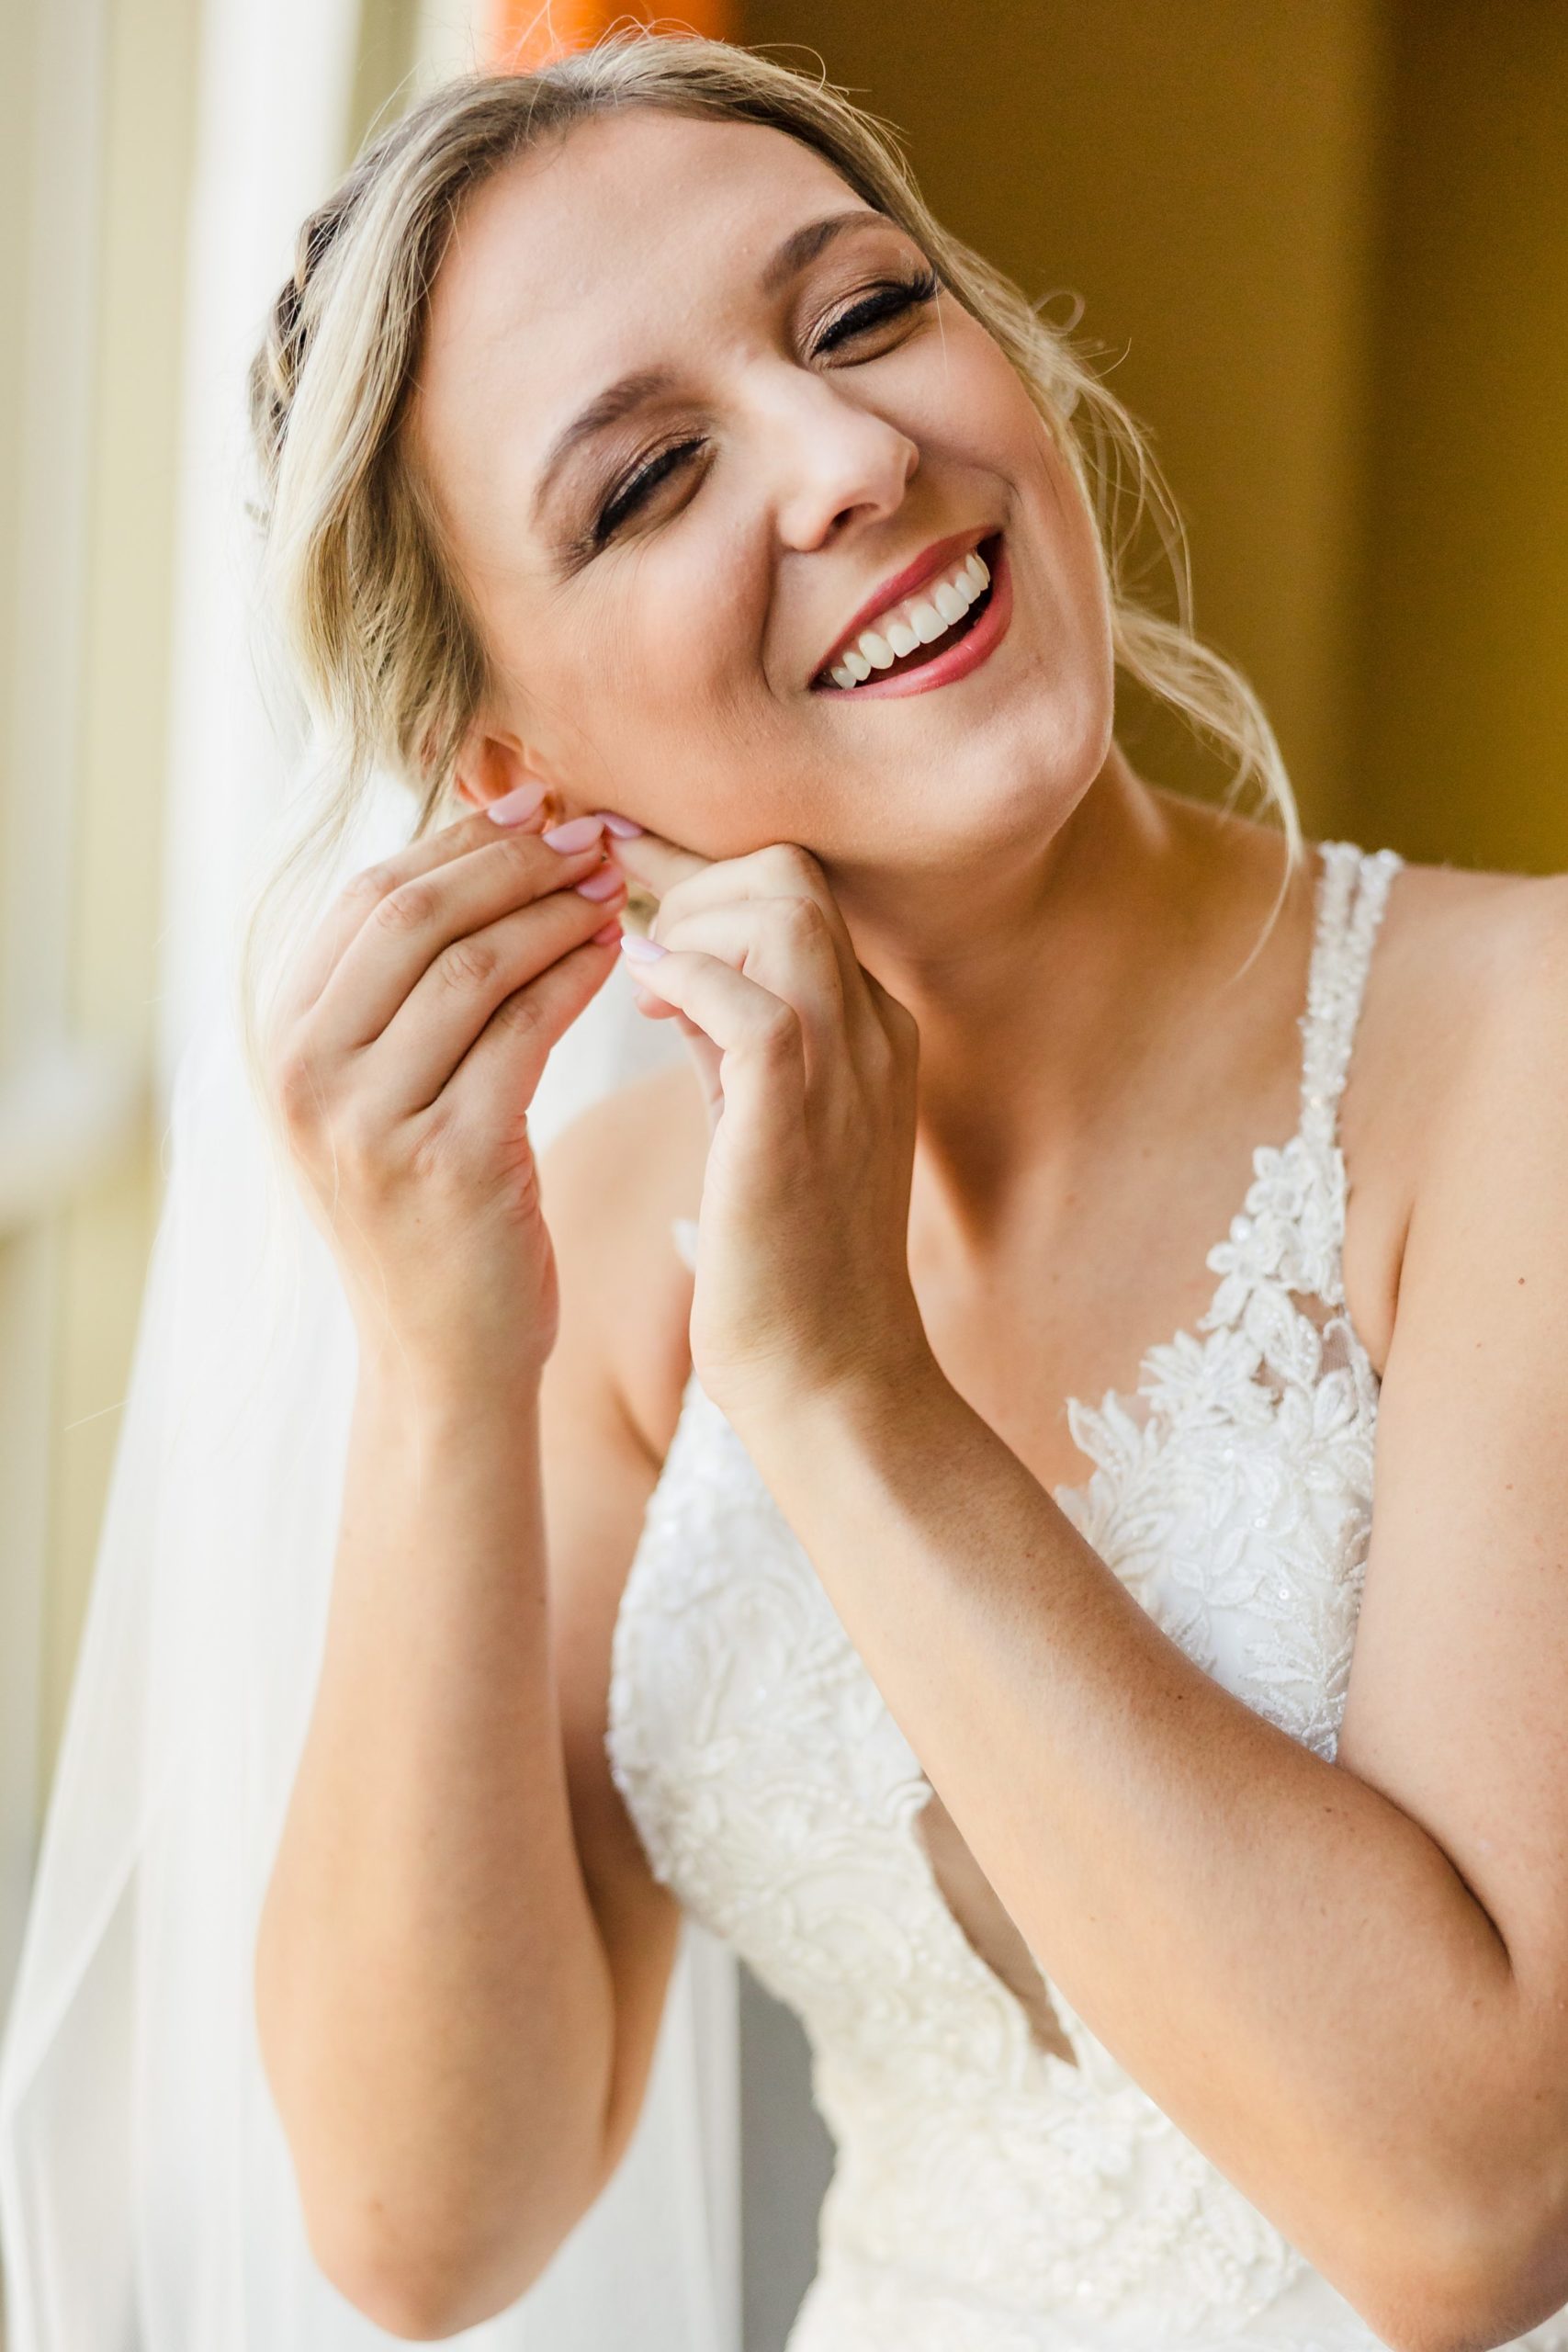 Bride puts in her ear rings before her wedding at the Luthy Botanical Garden in Peoria, Illinois